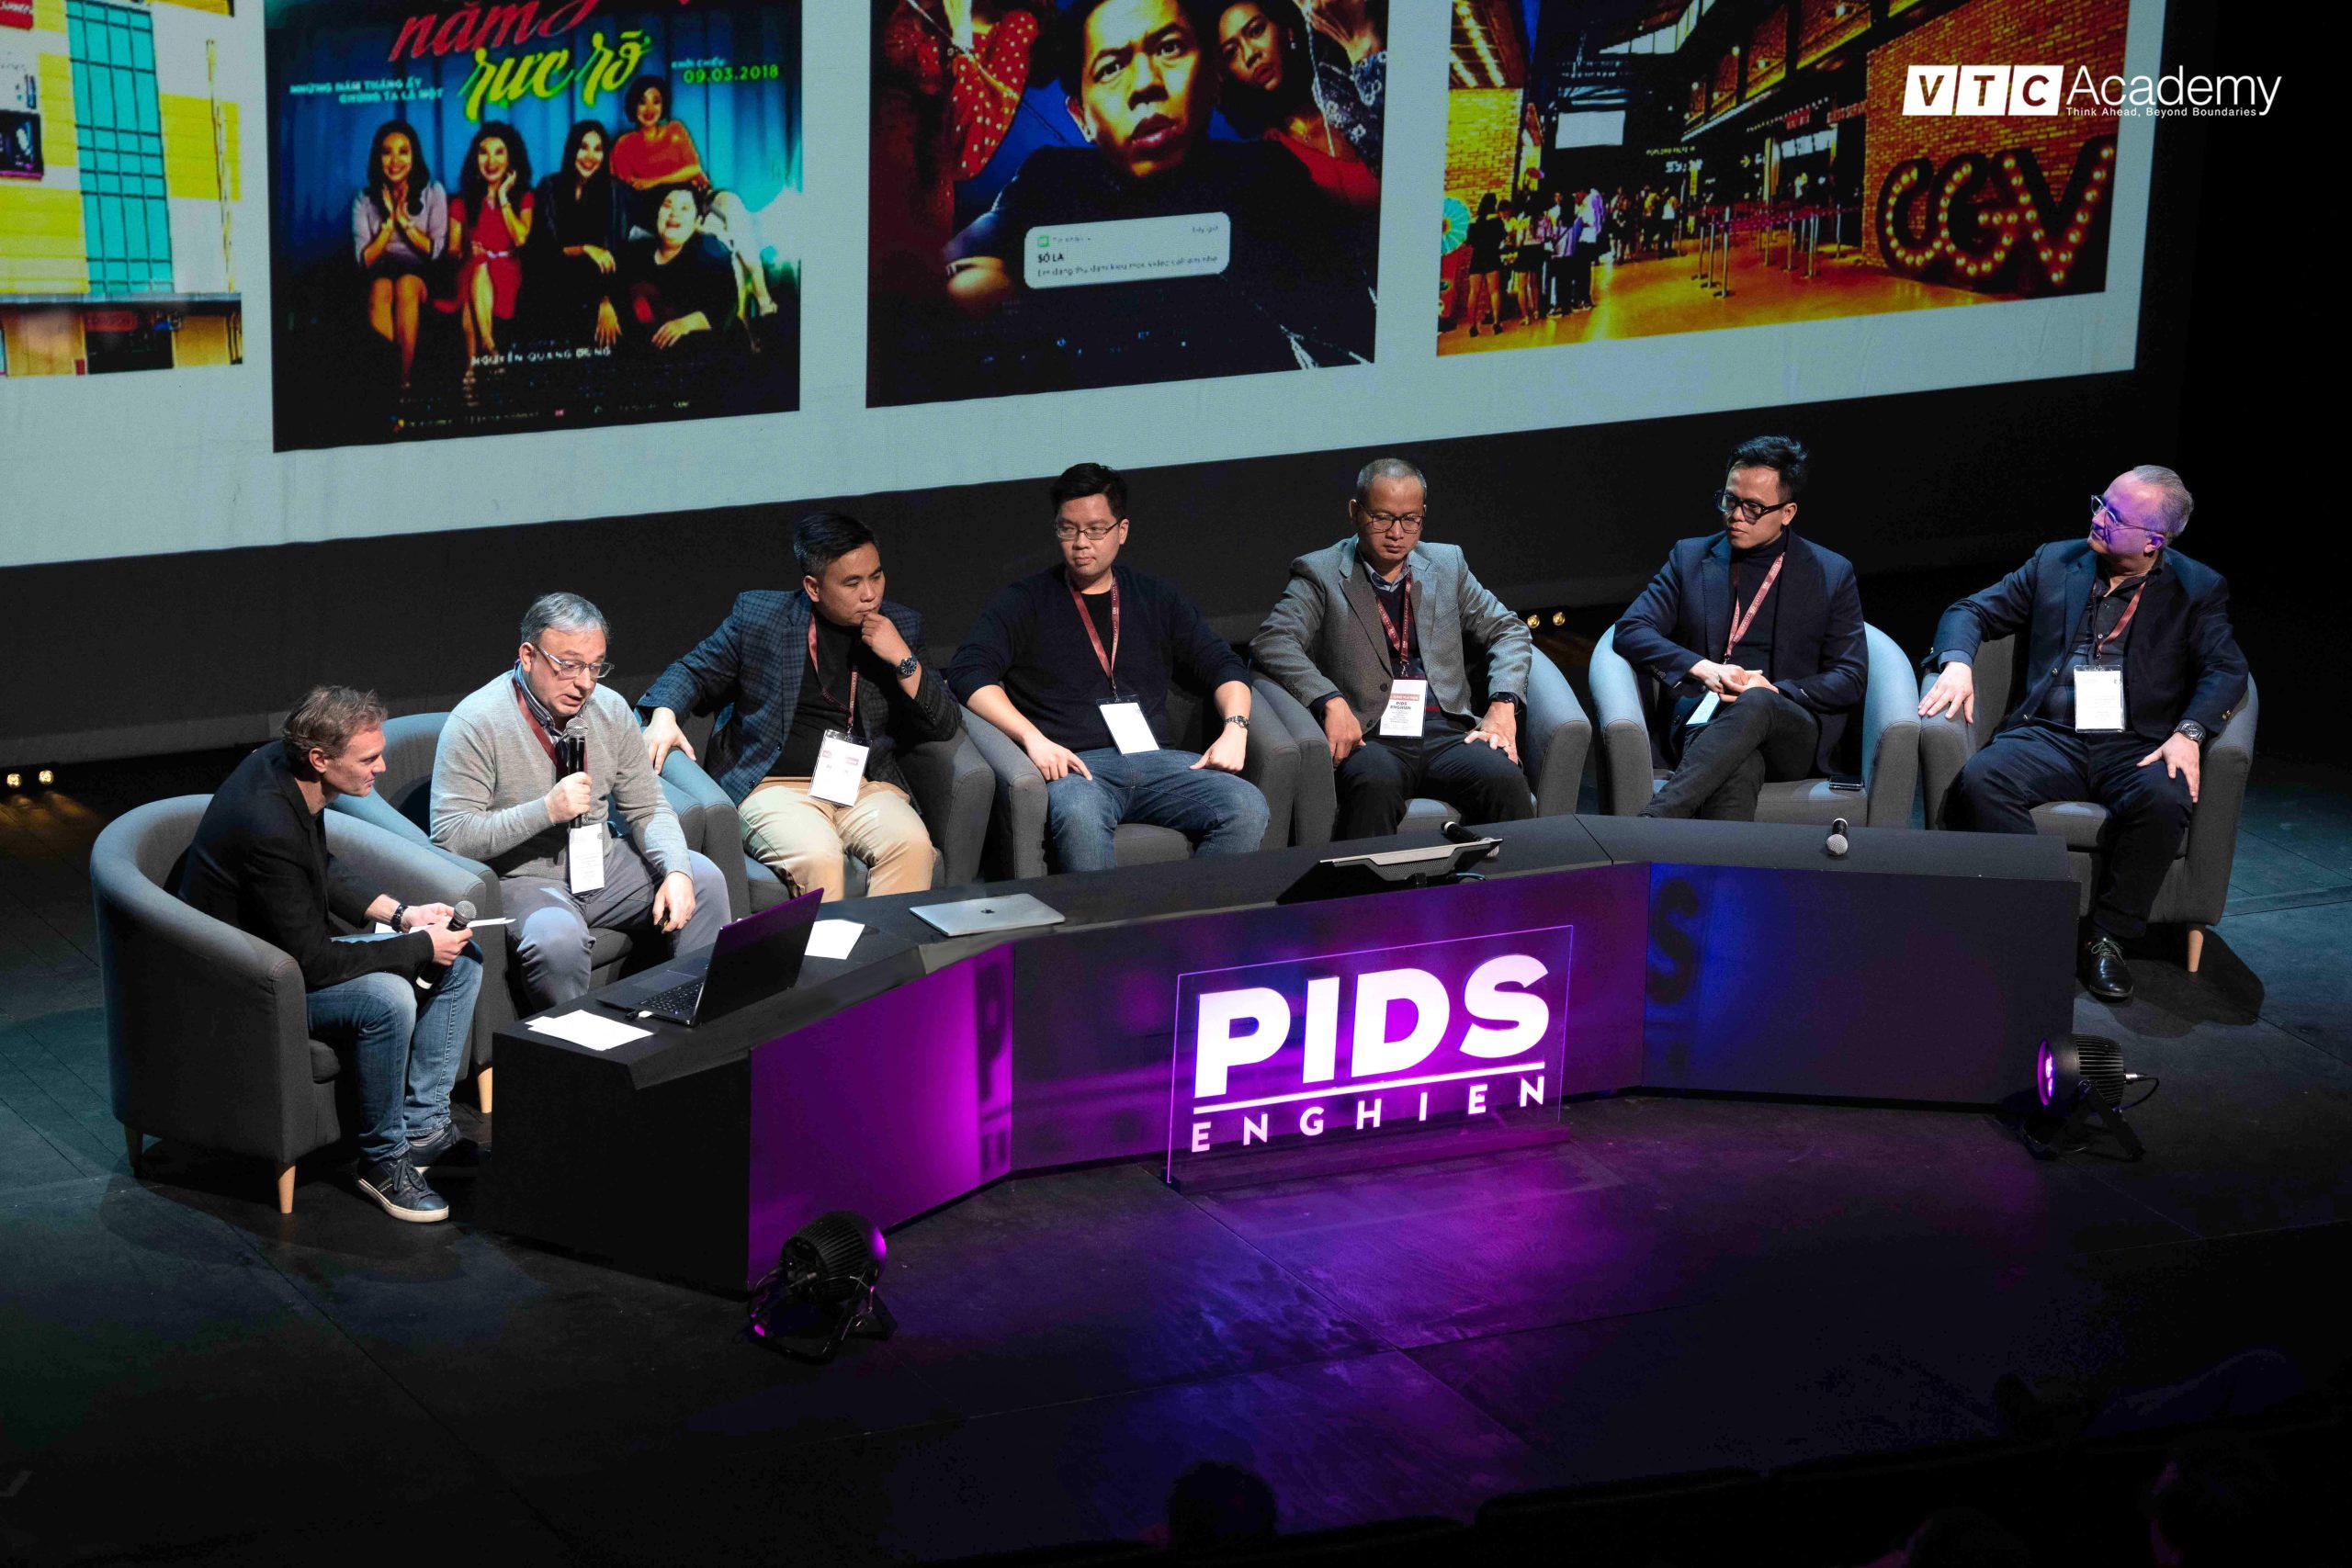 The CEO of VTC Academy, Mr. Hoang Viet Tan, had the honour of being a speaker at the PIDS Enghien 2023 event in France